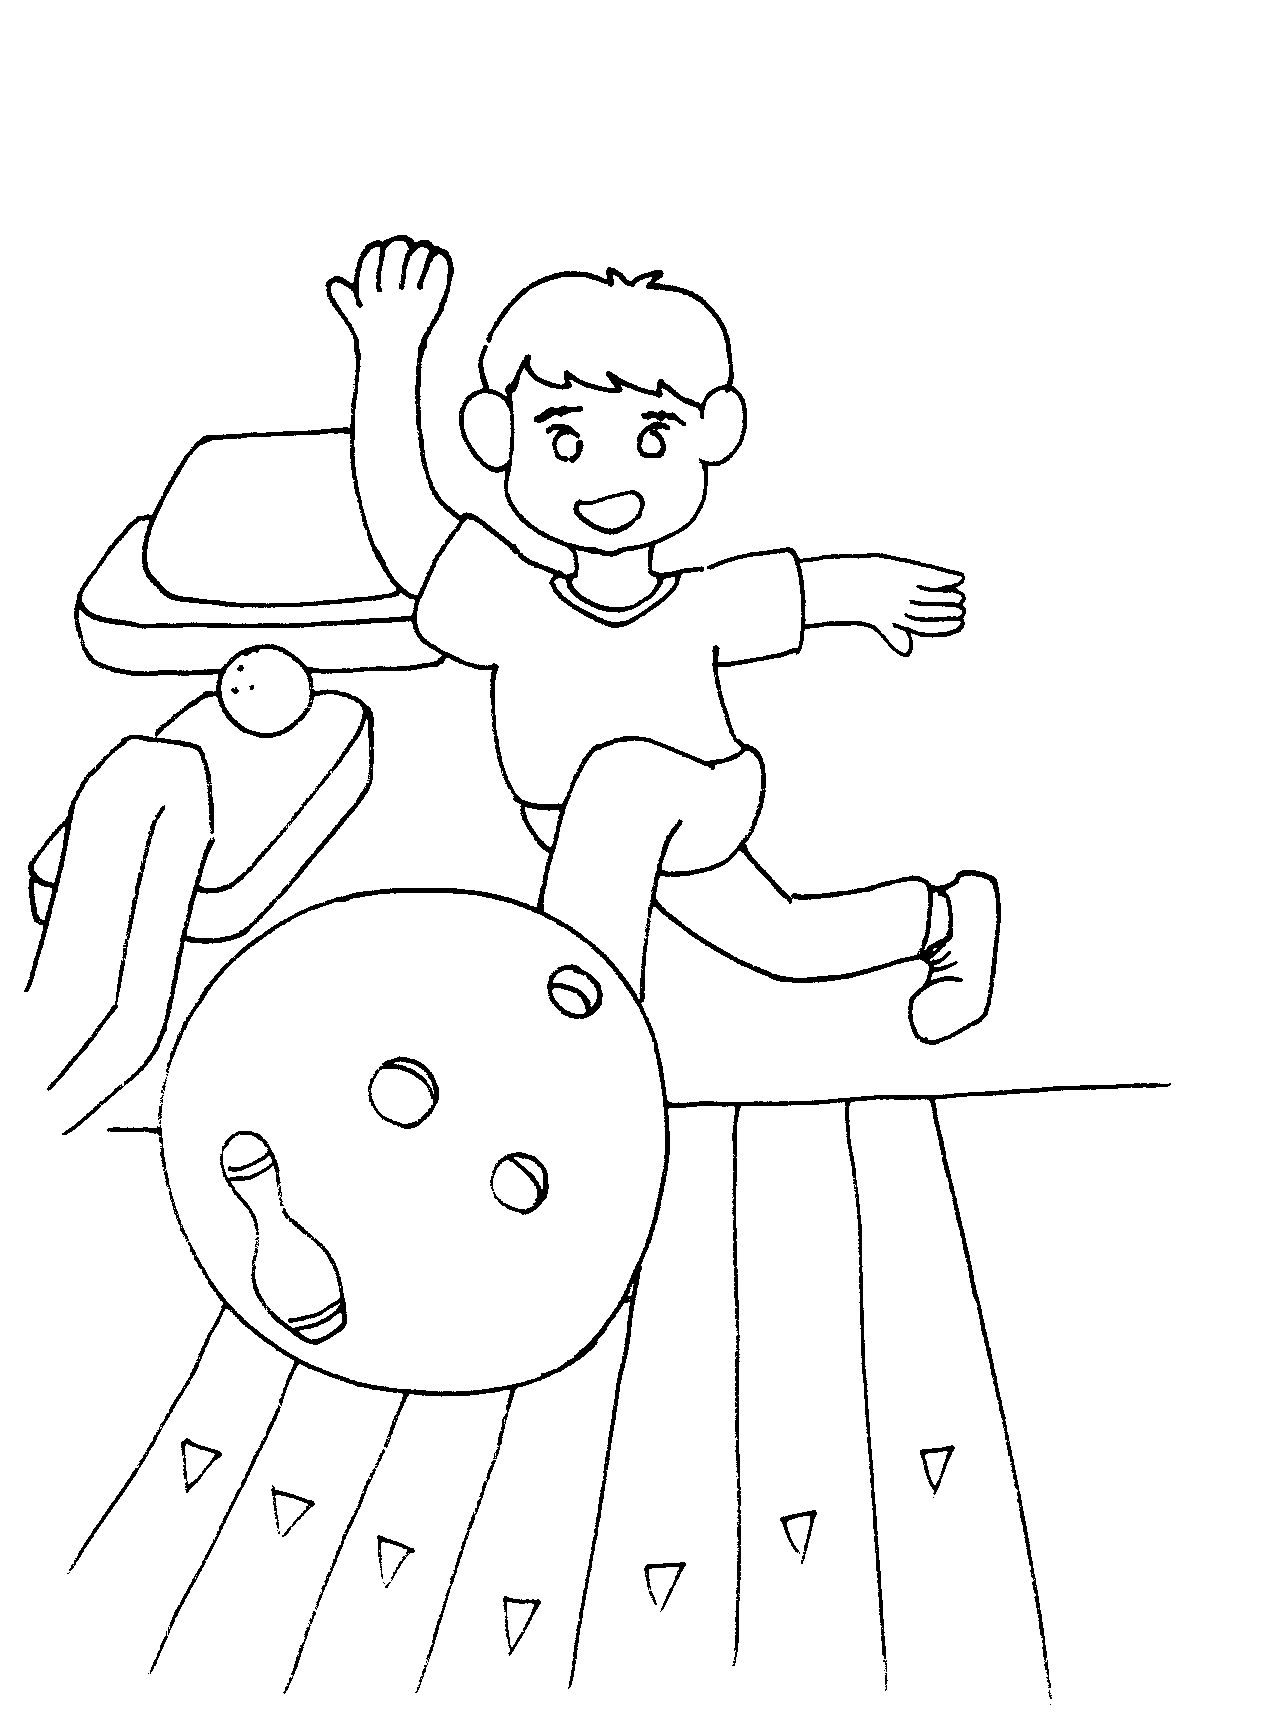 bowling coloring pages free